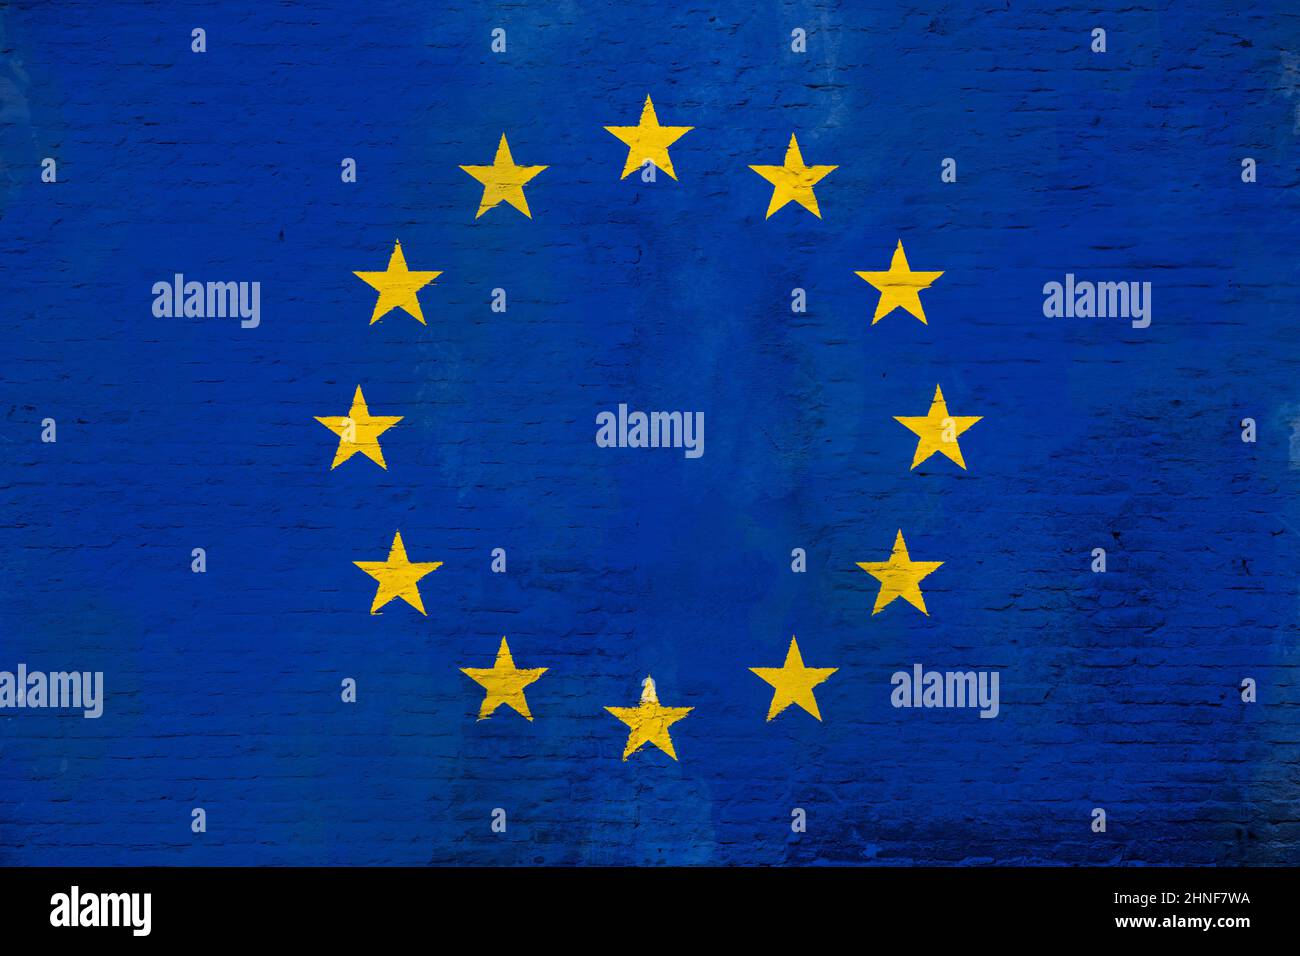 Full frame photo of a weathered flag of Europe (EU, European Union) painted on a plastered brick wall. Stock Photo